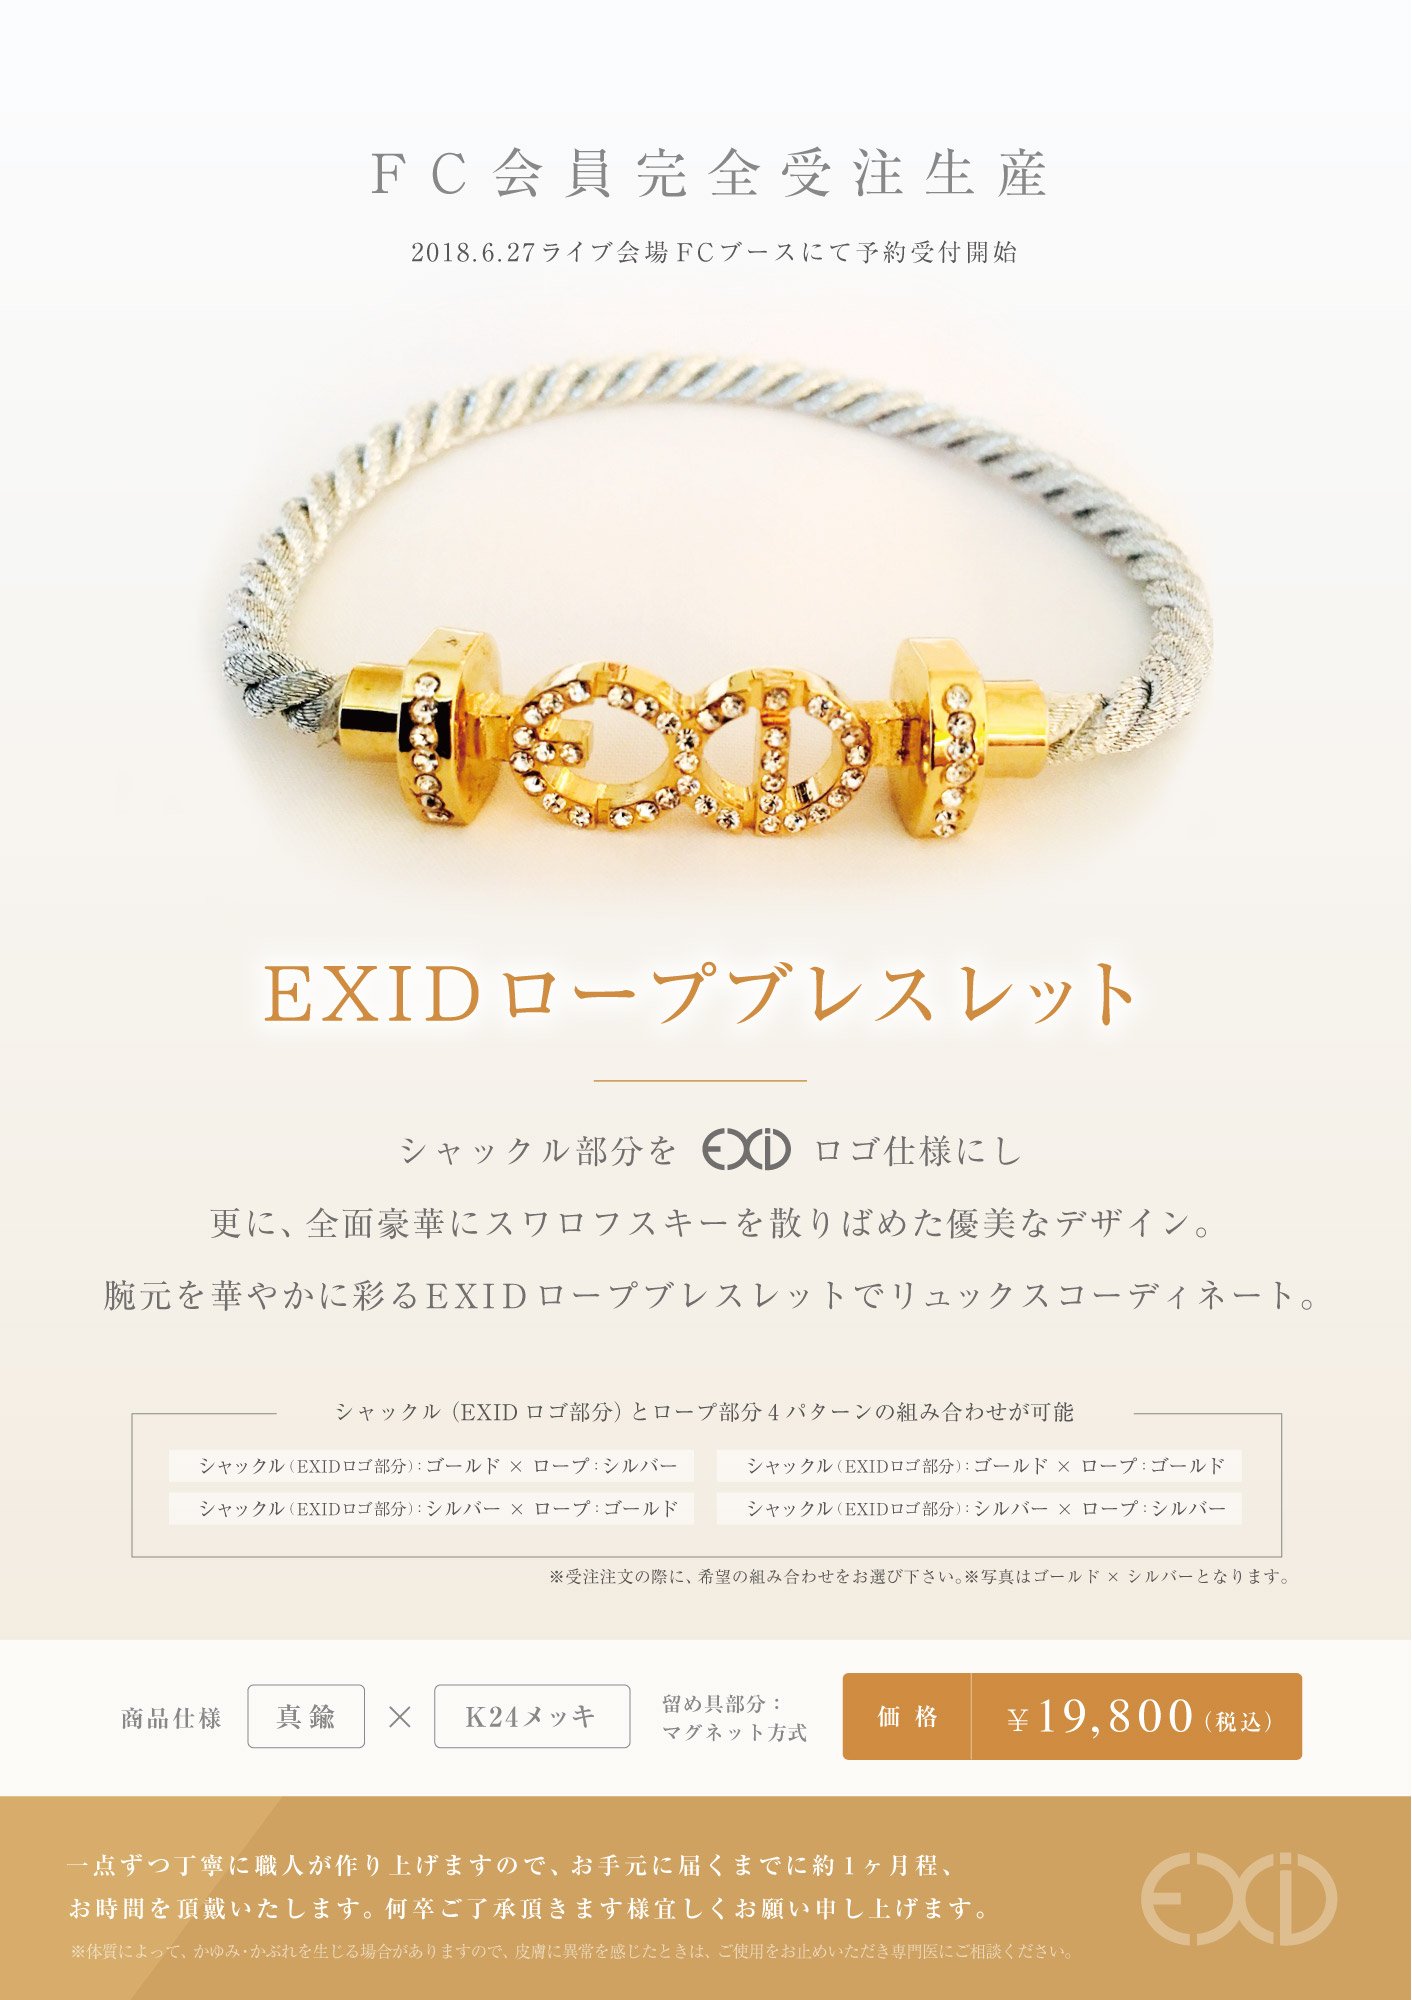 Exid Japan Official A Twitter Exid Japan Official Fanclub Info Fc会員完全受注生産グッズ Exidロープブレスレット 6 27東京 Zepptokyo Fcブースにて申込受付開始